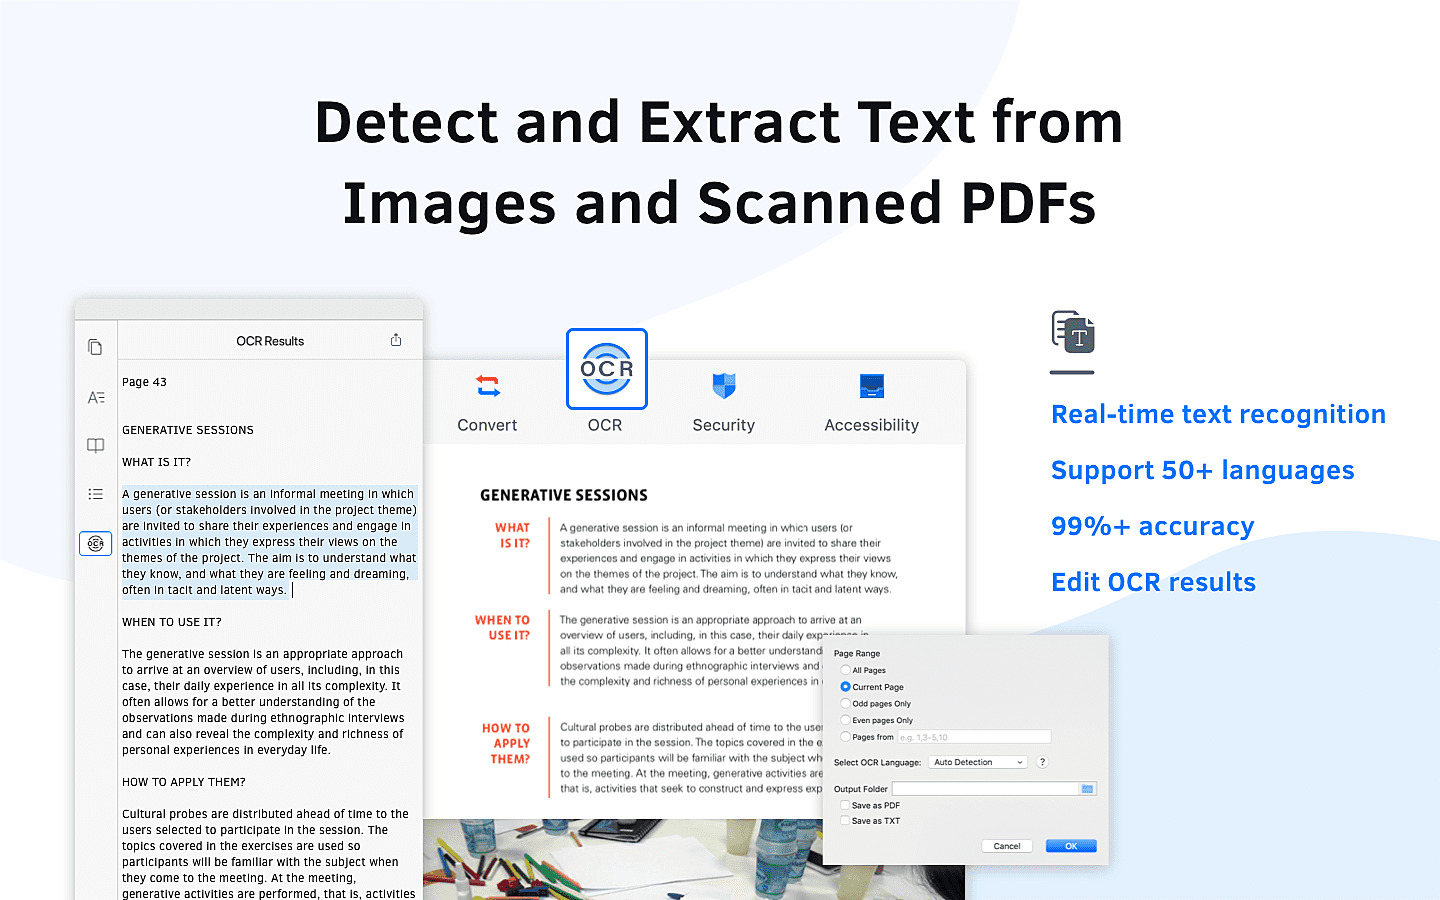 Detect and extract text from image